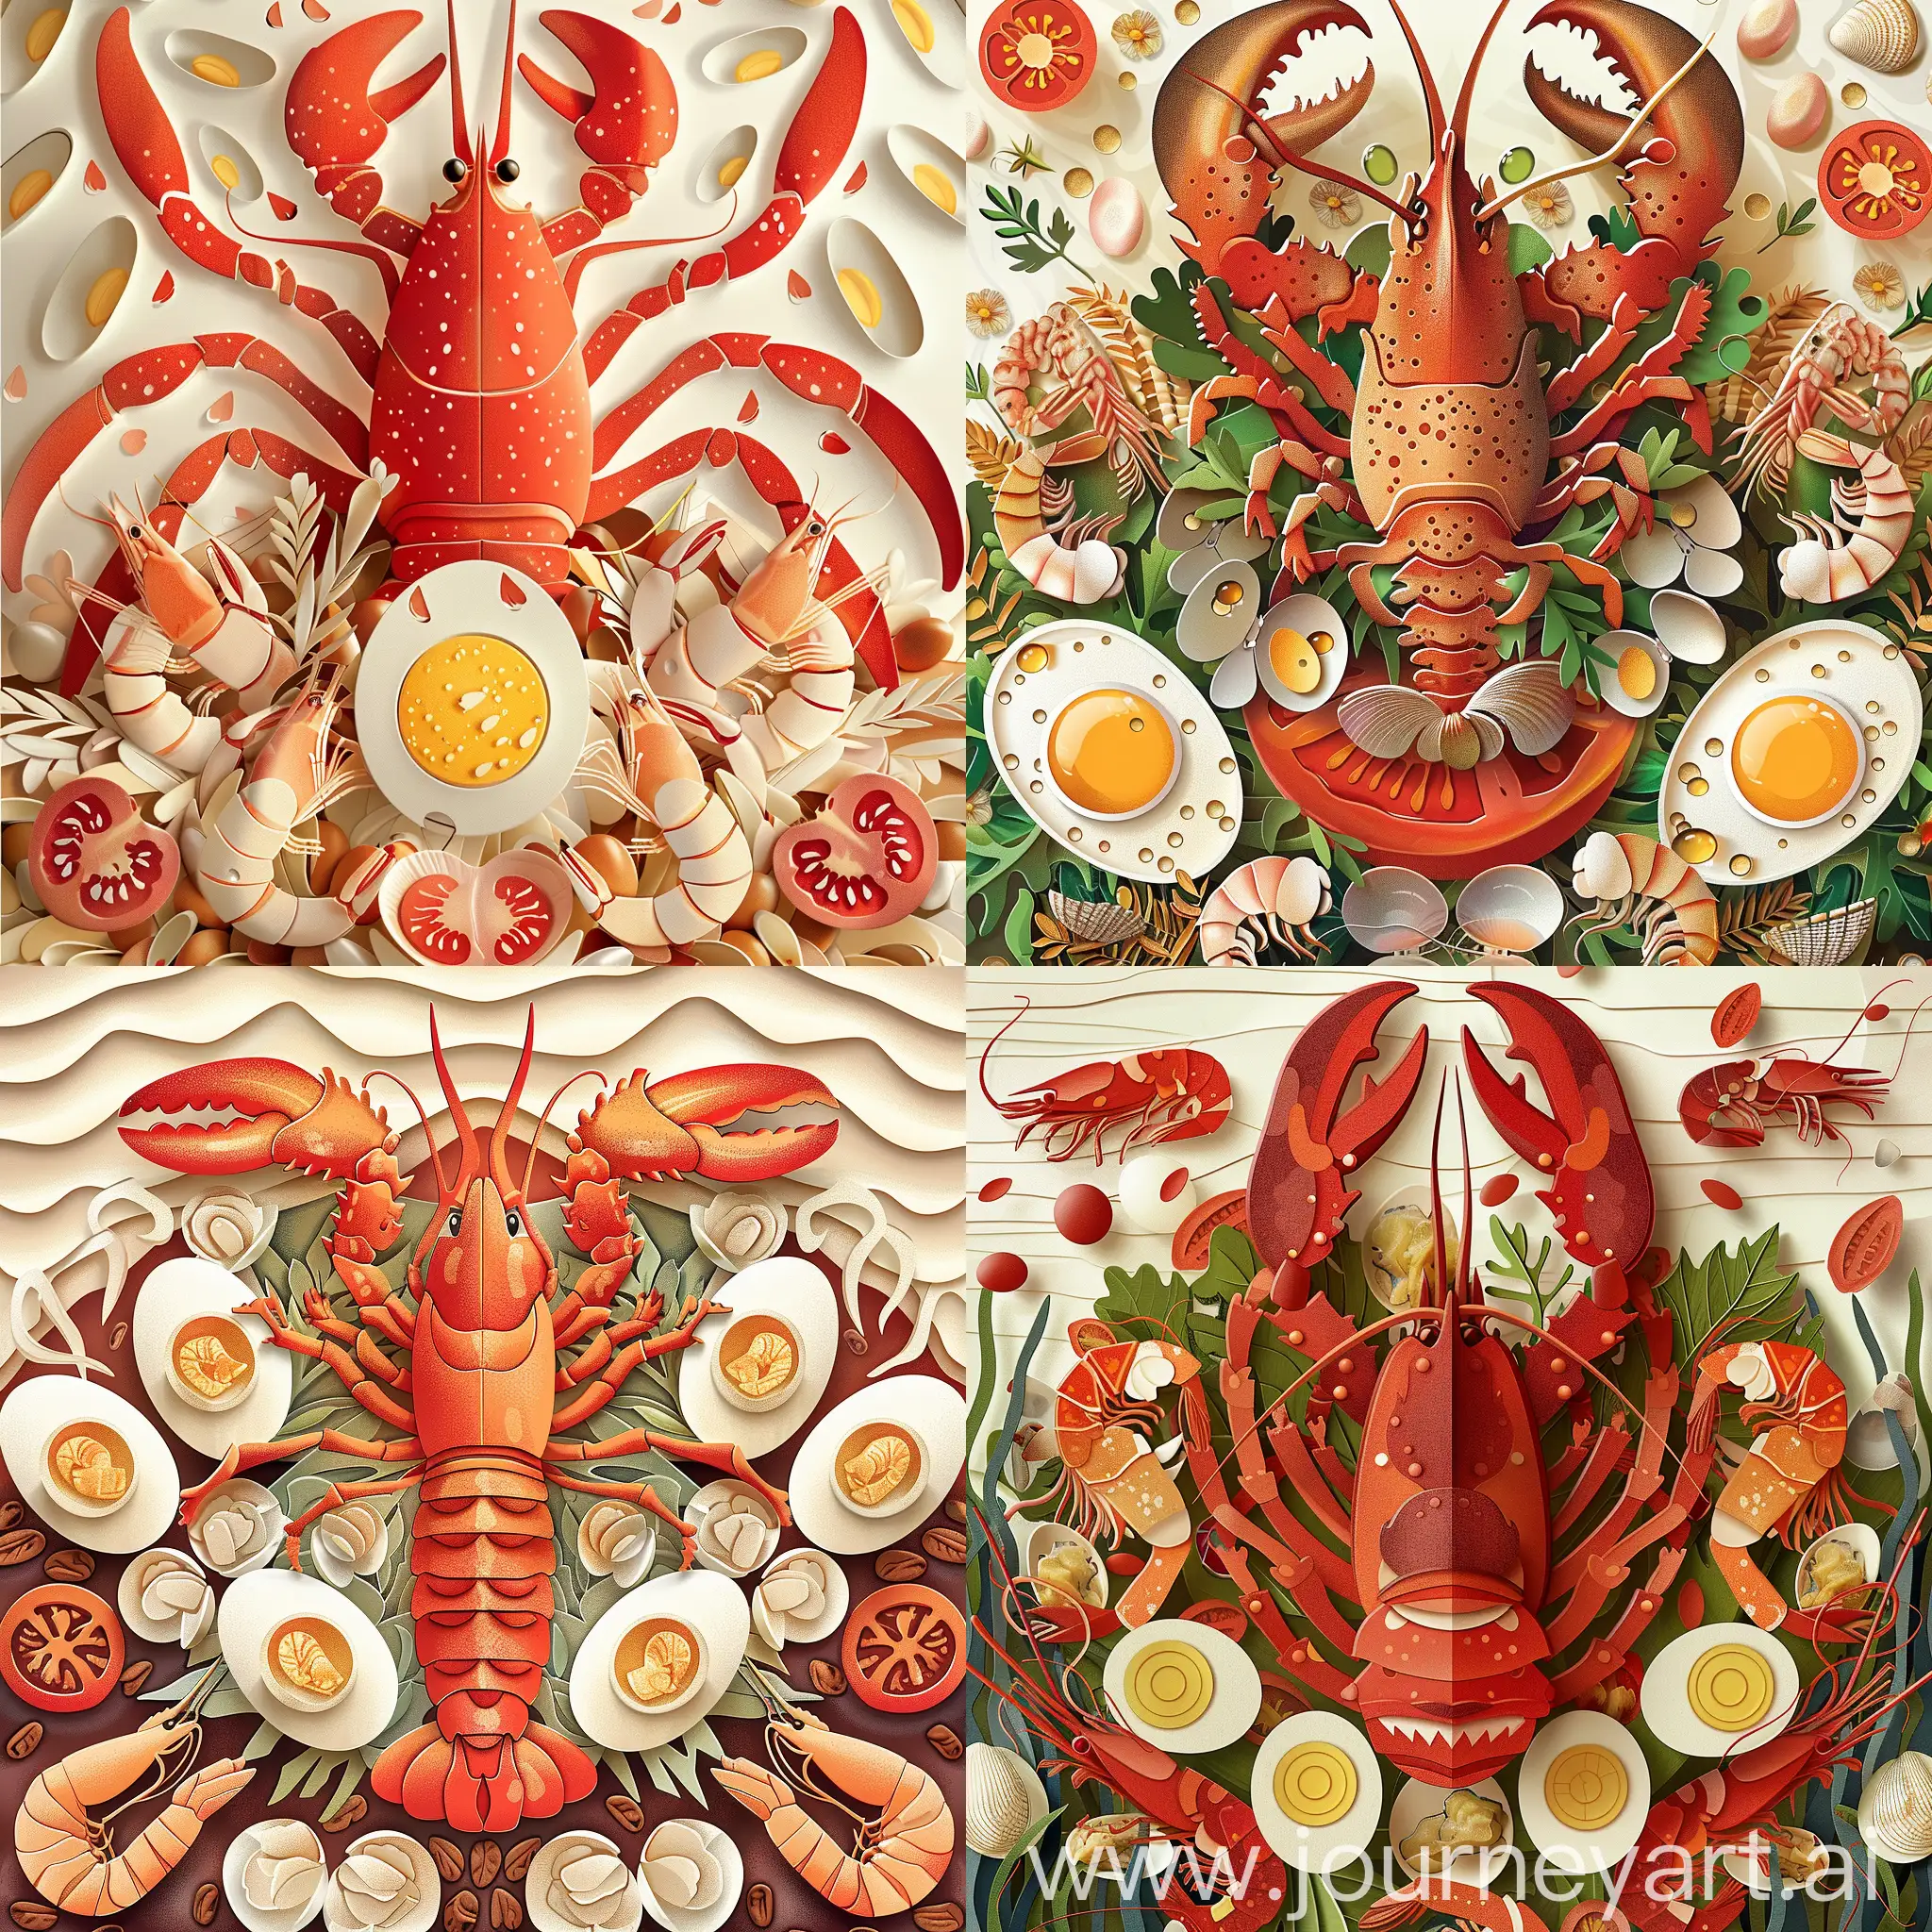 cut paper art of a salad with half eggs and tomato, featuring a large lobster as the centerpiece, surrounded by shrimp and clams, high quality details, in vector style